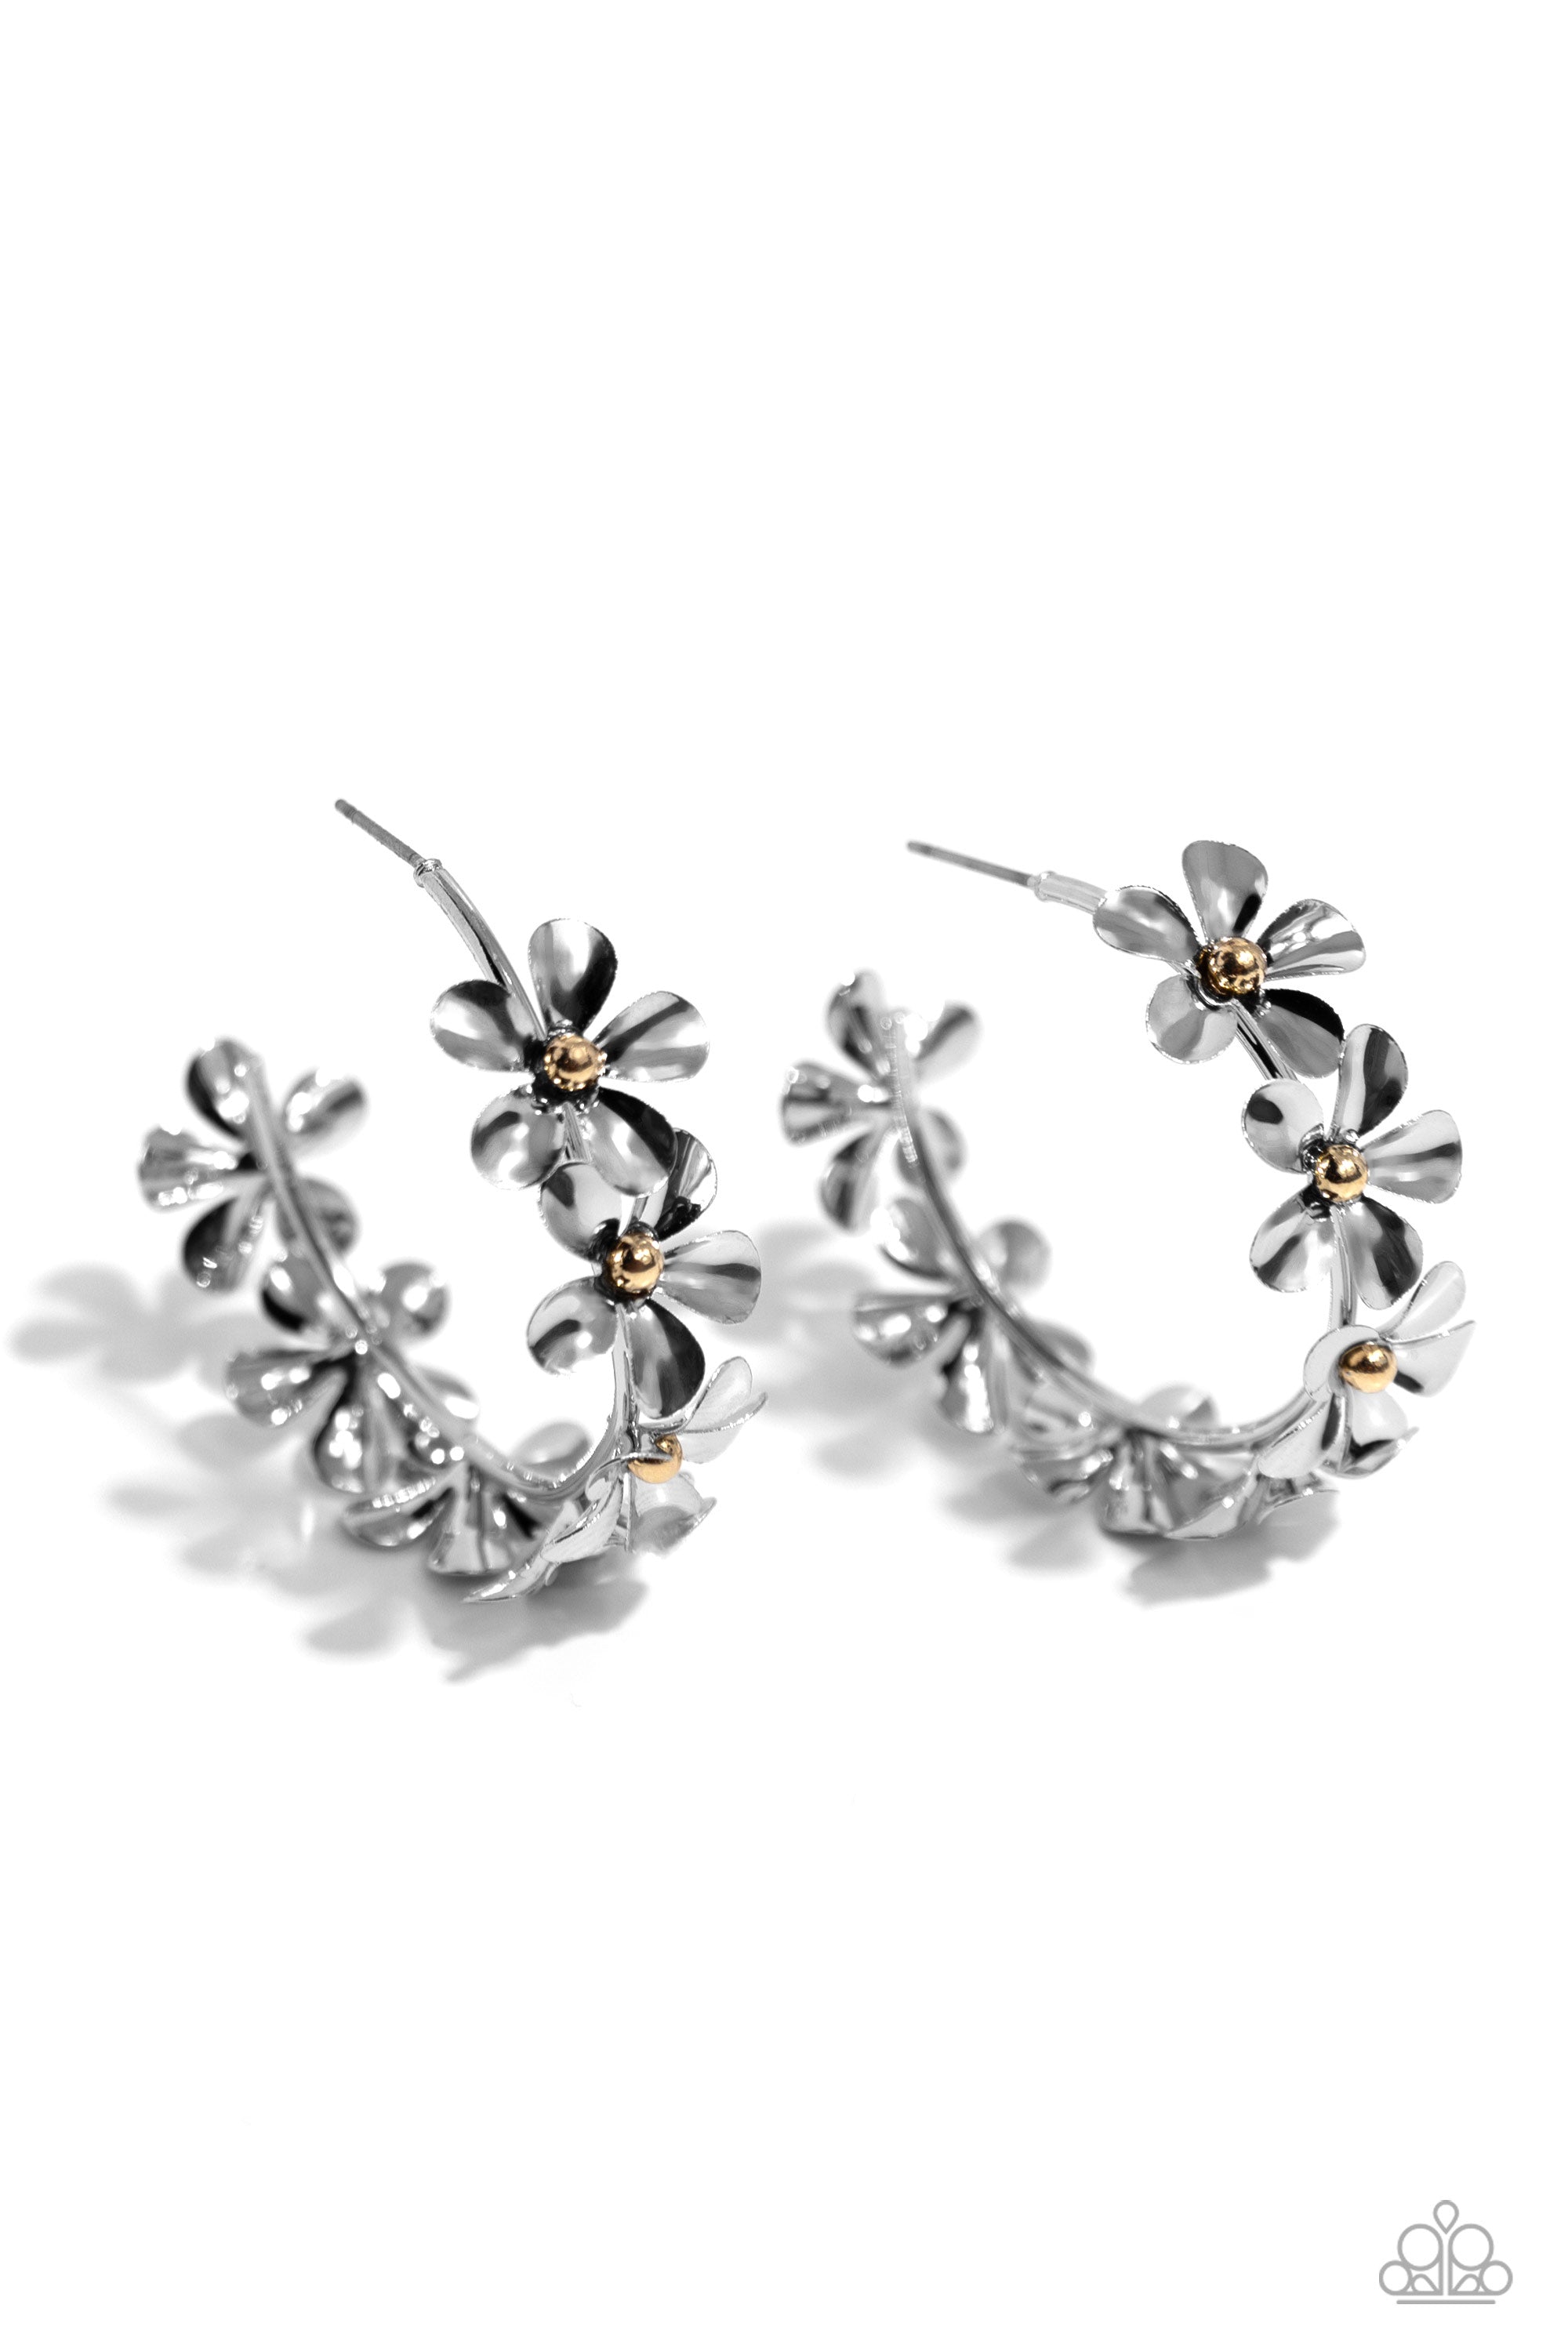 Floral Flamenco Silver Flower Hoop Earrings - Paparazzi Accessories- lightbox - CarasShop.com - $5 Jewelry by Cara Jewels